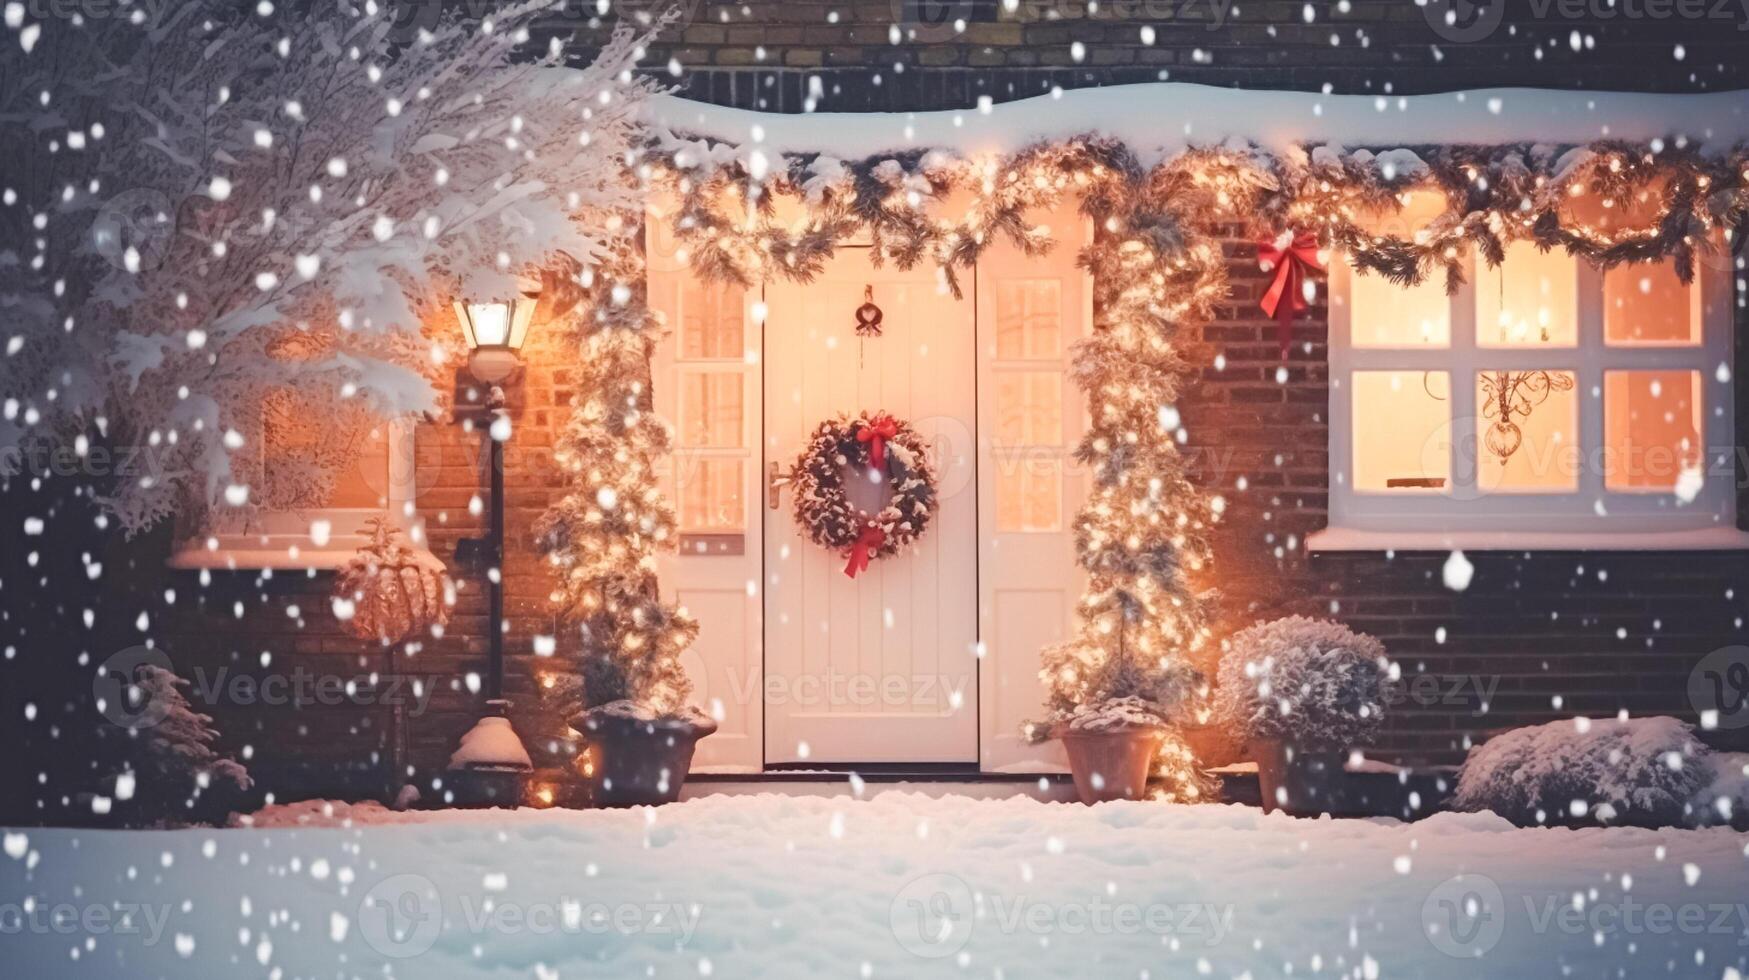 AI generated Christmas in the countryside, cottage and garden decorated for holidays on a snowy winter evening with snow and holiday lights, English country styling photo